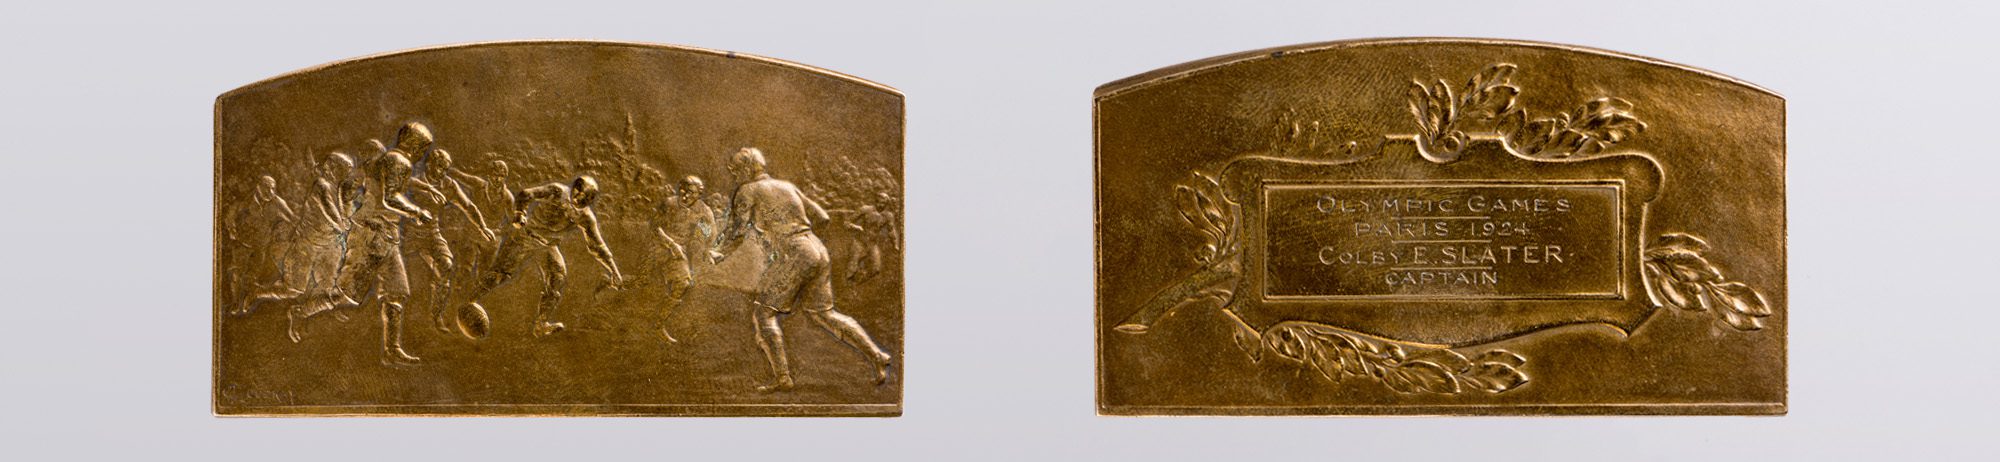 Two gold medals, side by side. The one on the left is imprinted with an illustration of a rugby match. The one on the right is engraved with the words "Olympic Games, Paris 1924, Colby E. Slater, Captain"